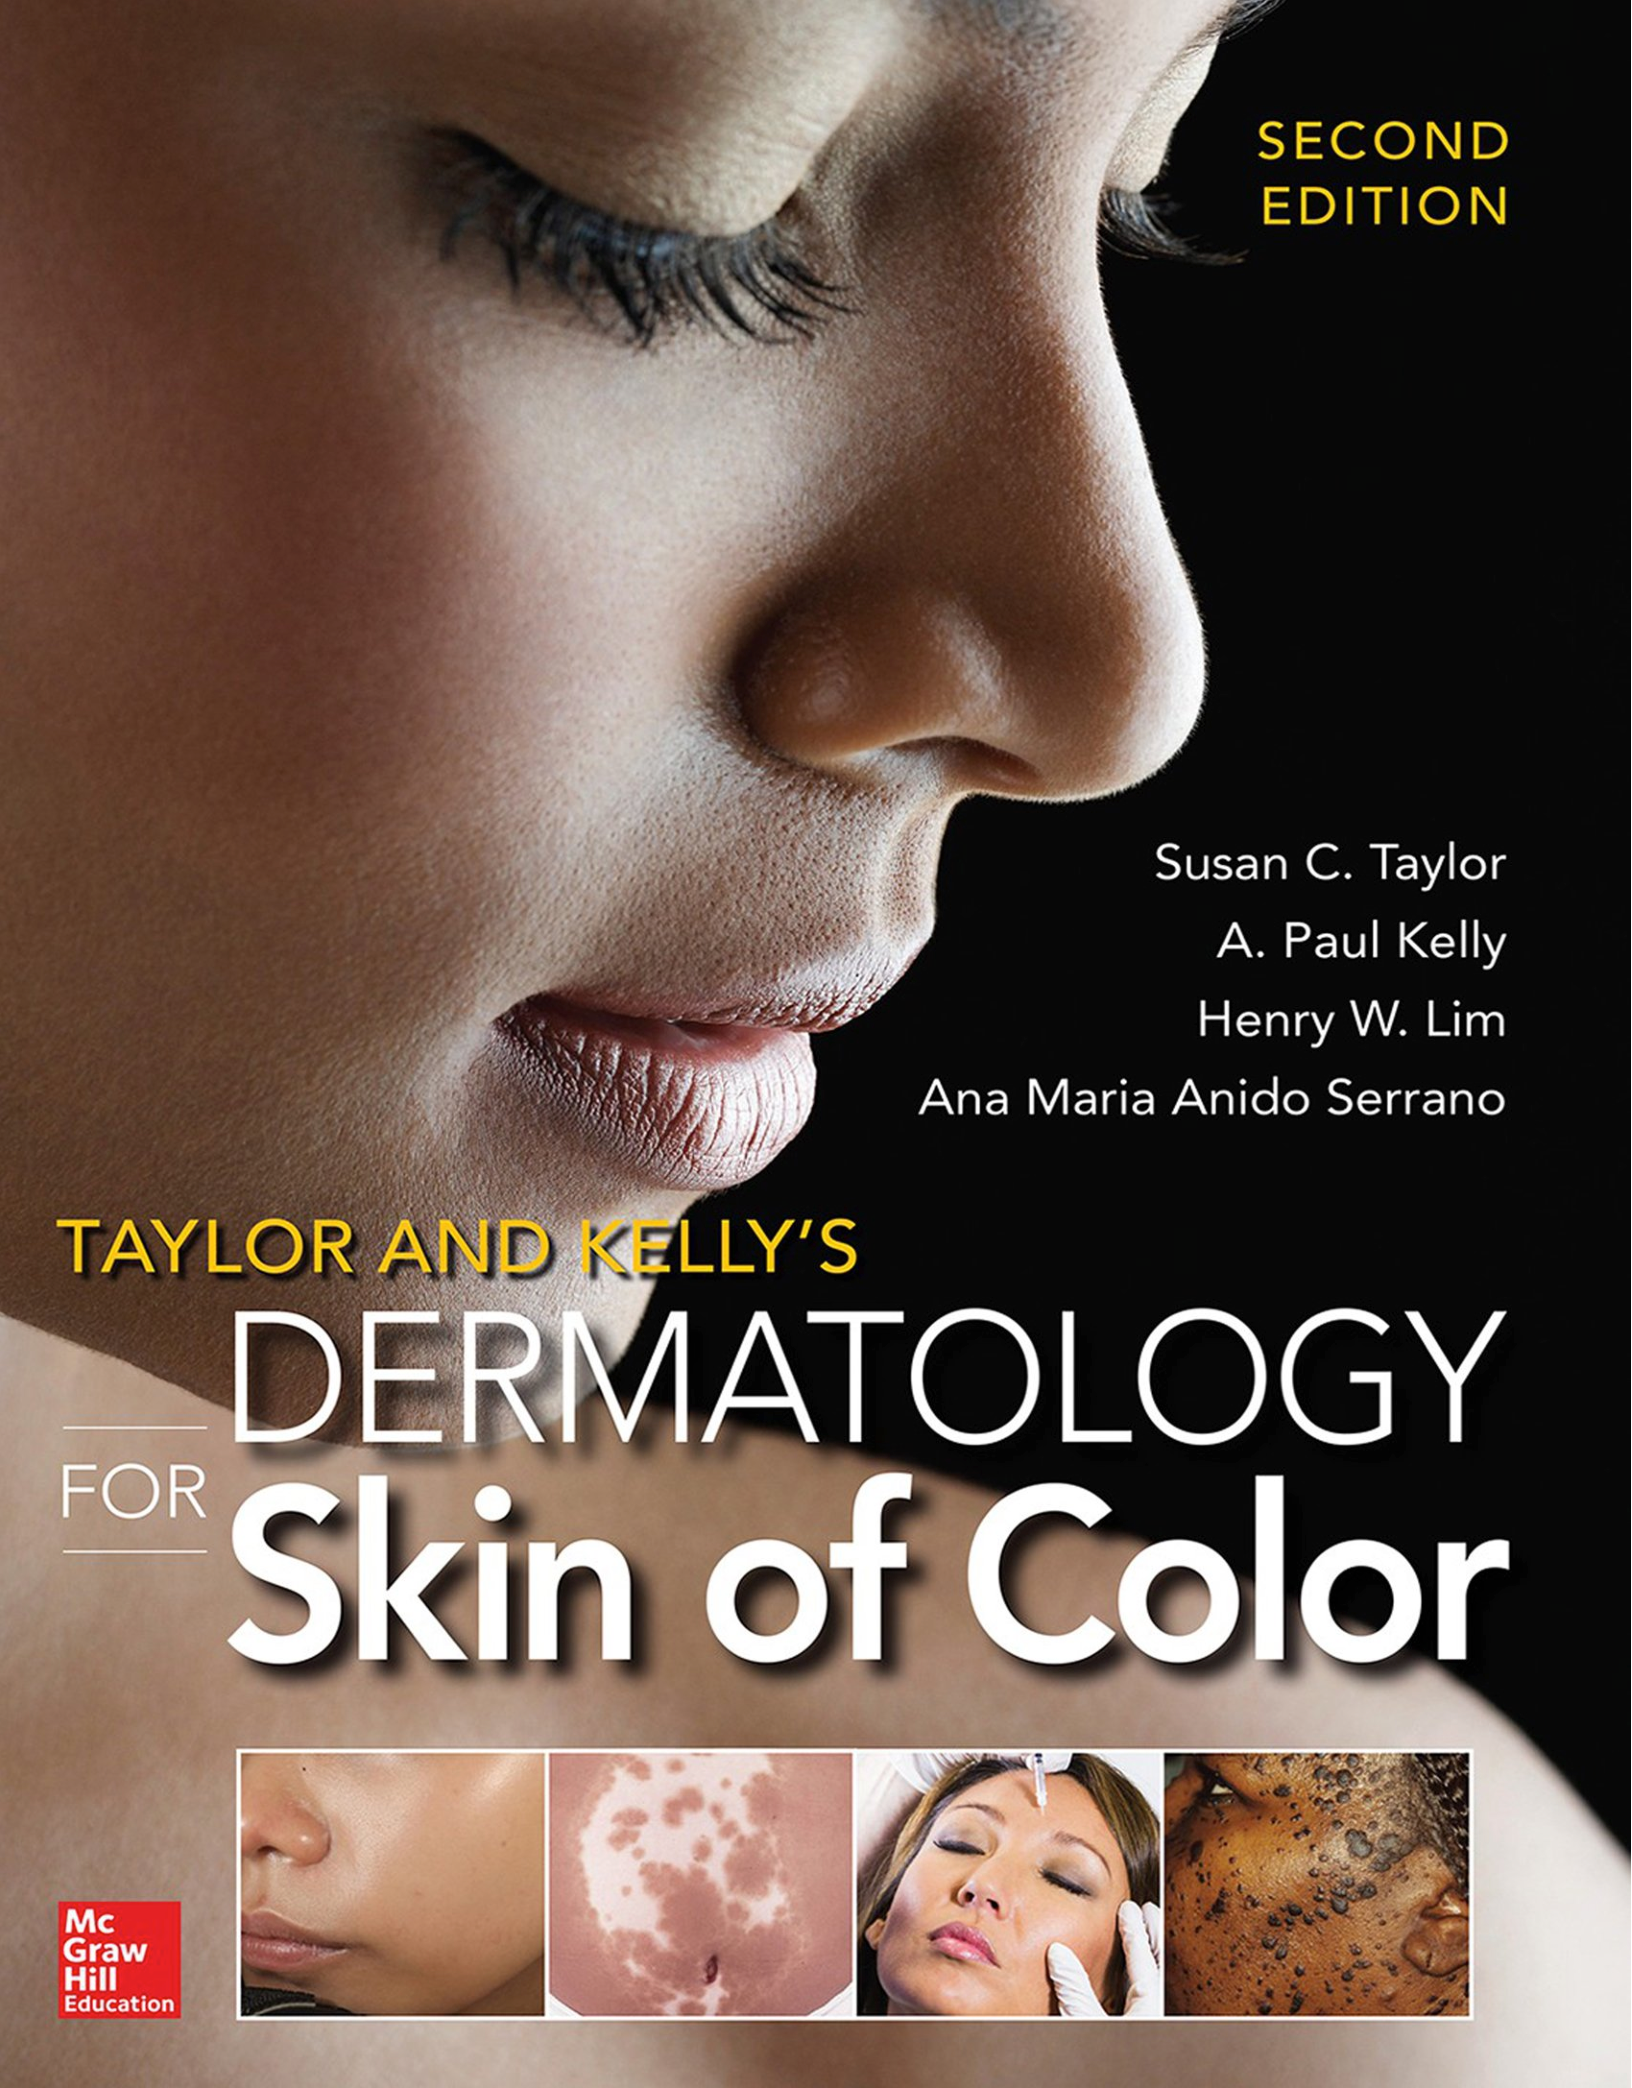 Taylor and Kelly’s Dermatology for Skin of Color by Susan Taylor, A